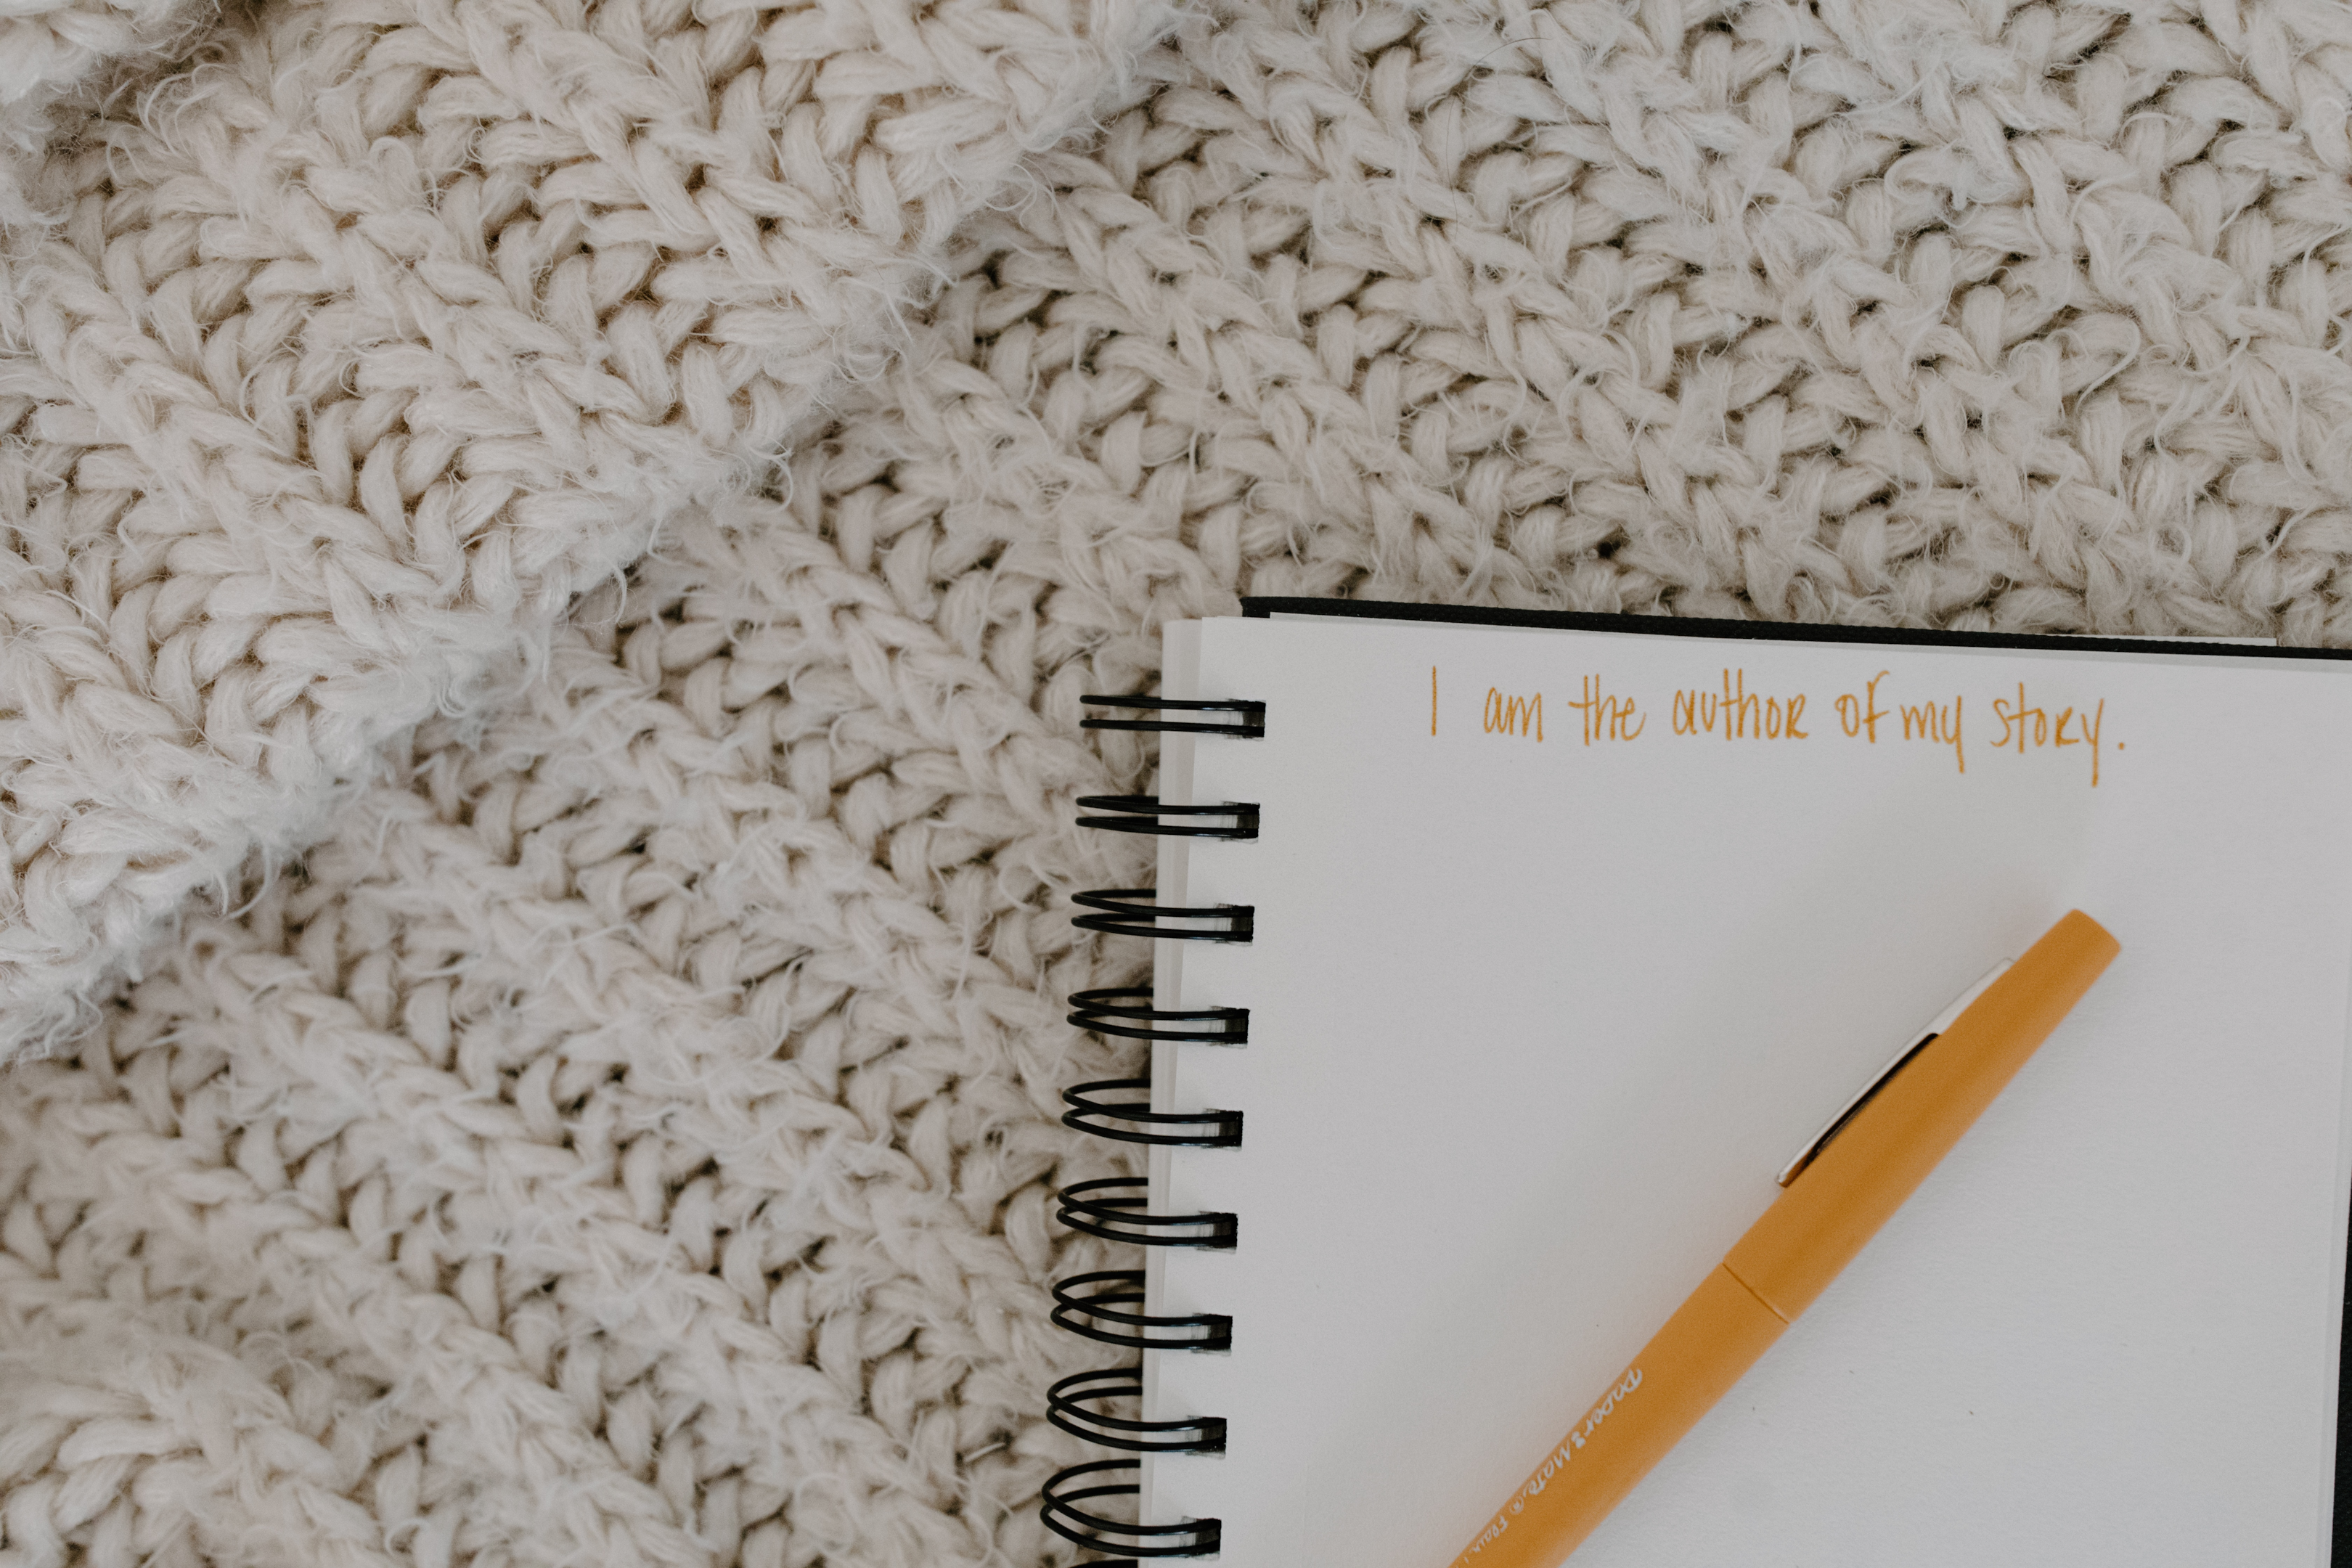 A spiral notebook and pencil on a cozy blanket with "I am the author of my story" written on it